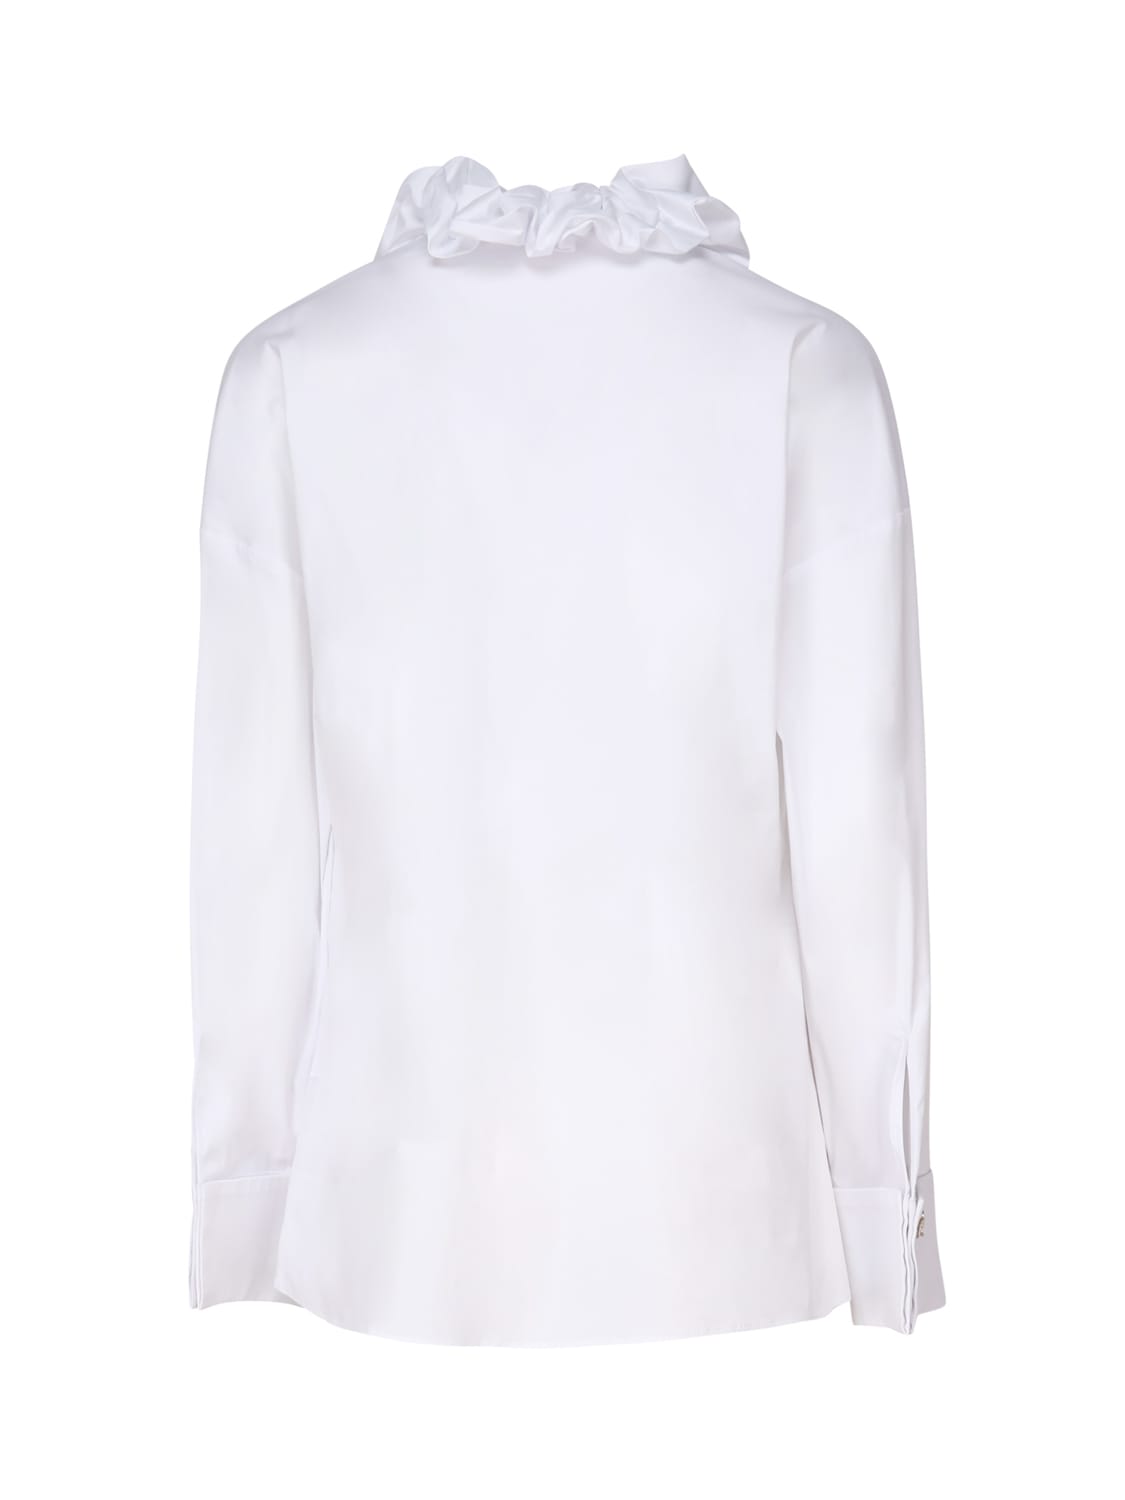 Shop Genny Blouse With Ruffles In White